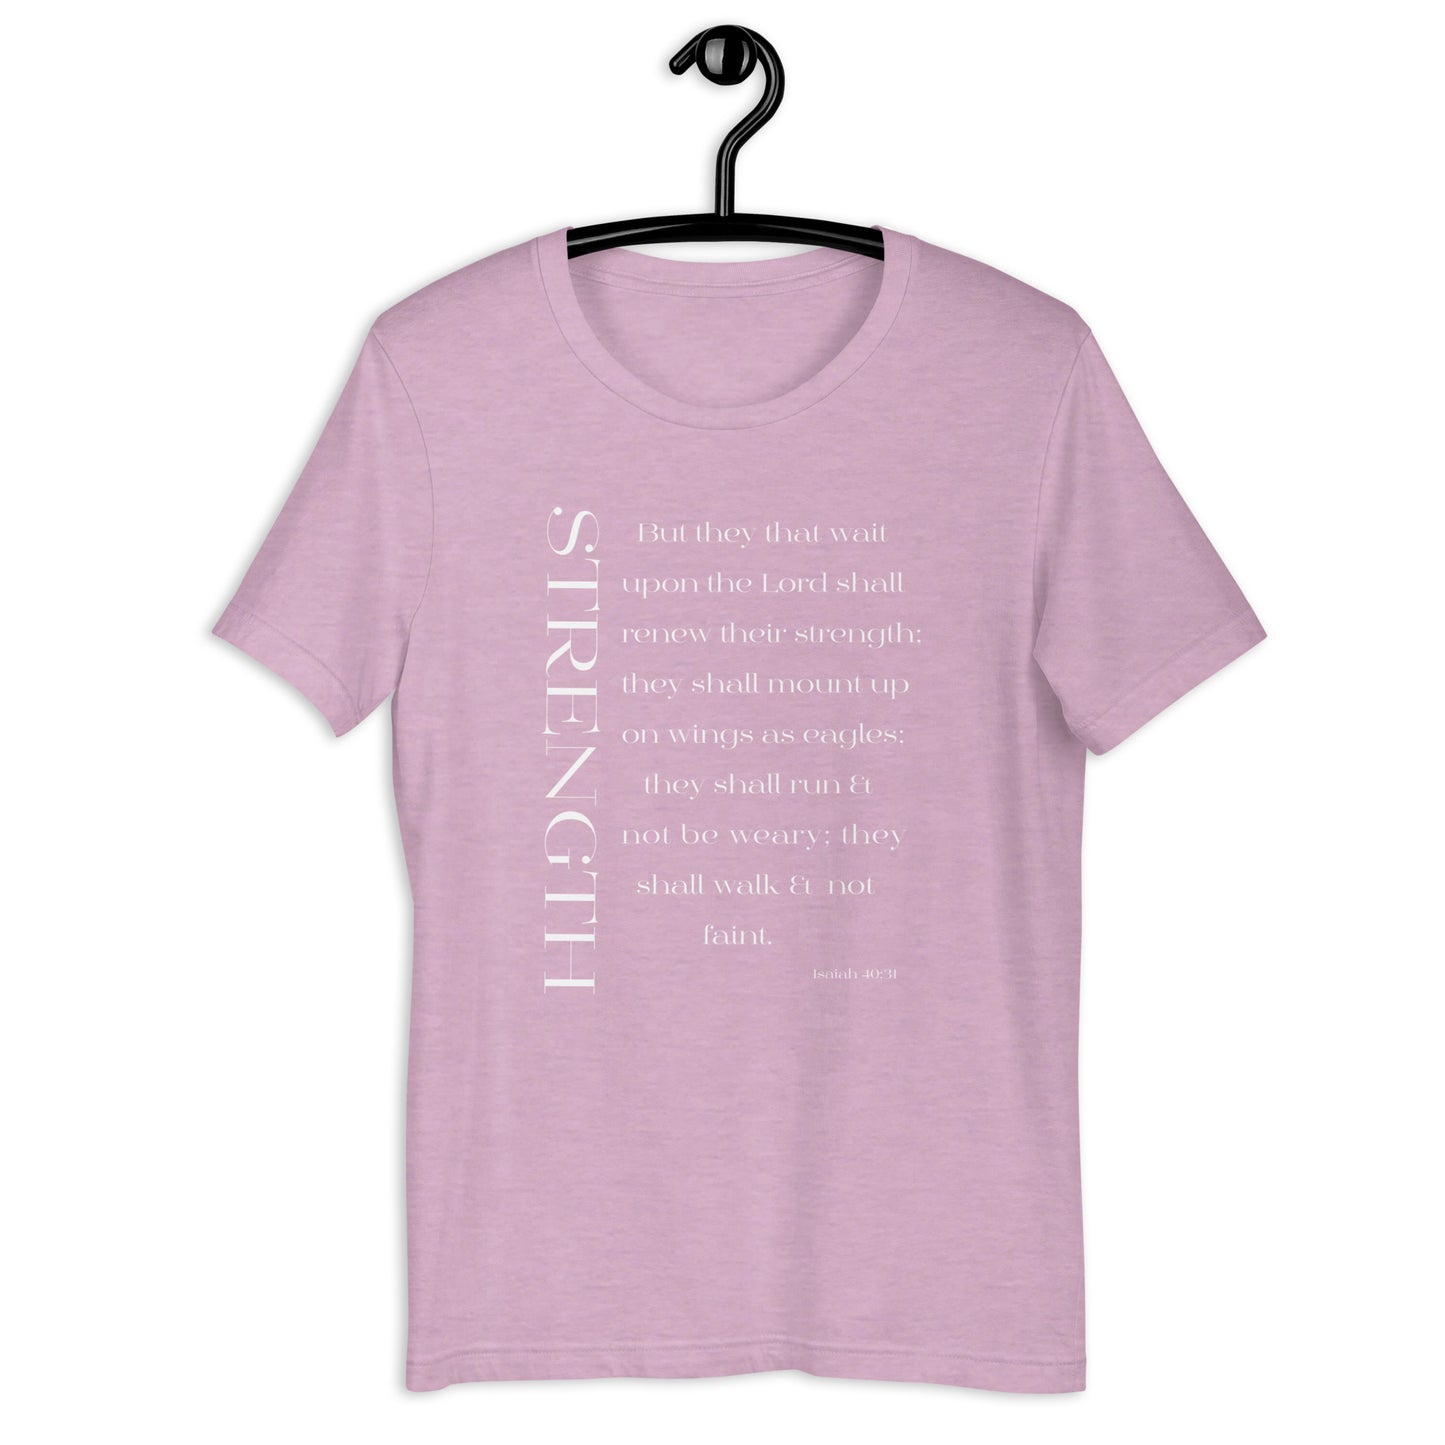 Isaiah 40:31 Strength Short-Sleeve Unisex T-Shirt heather prism lilac on hanger